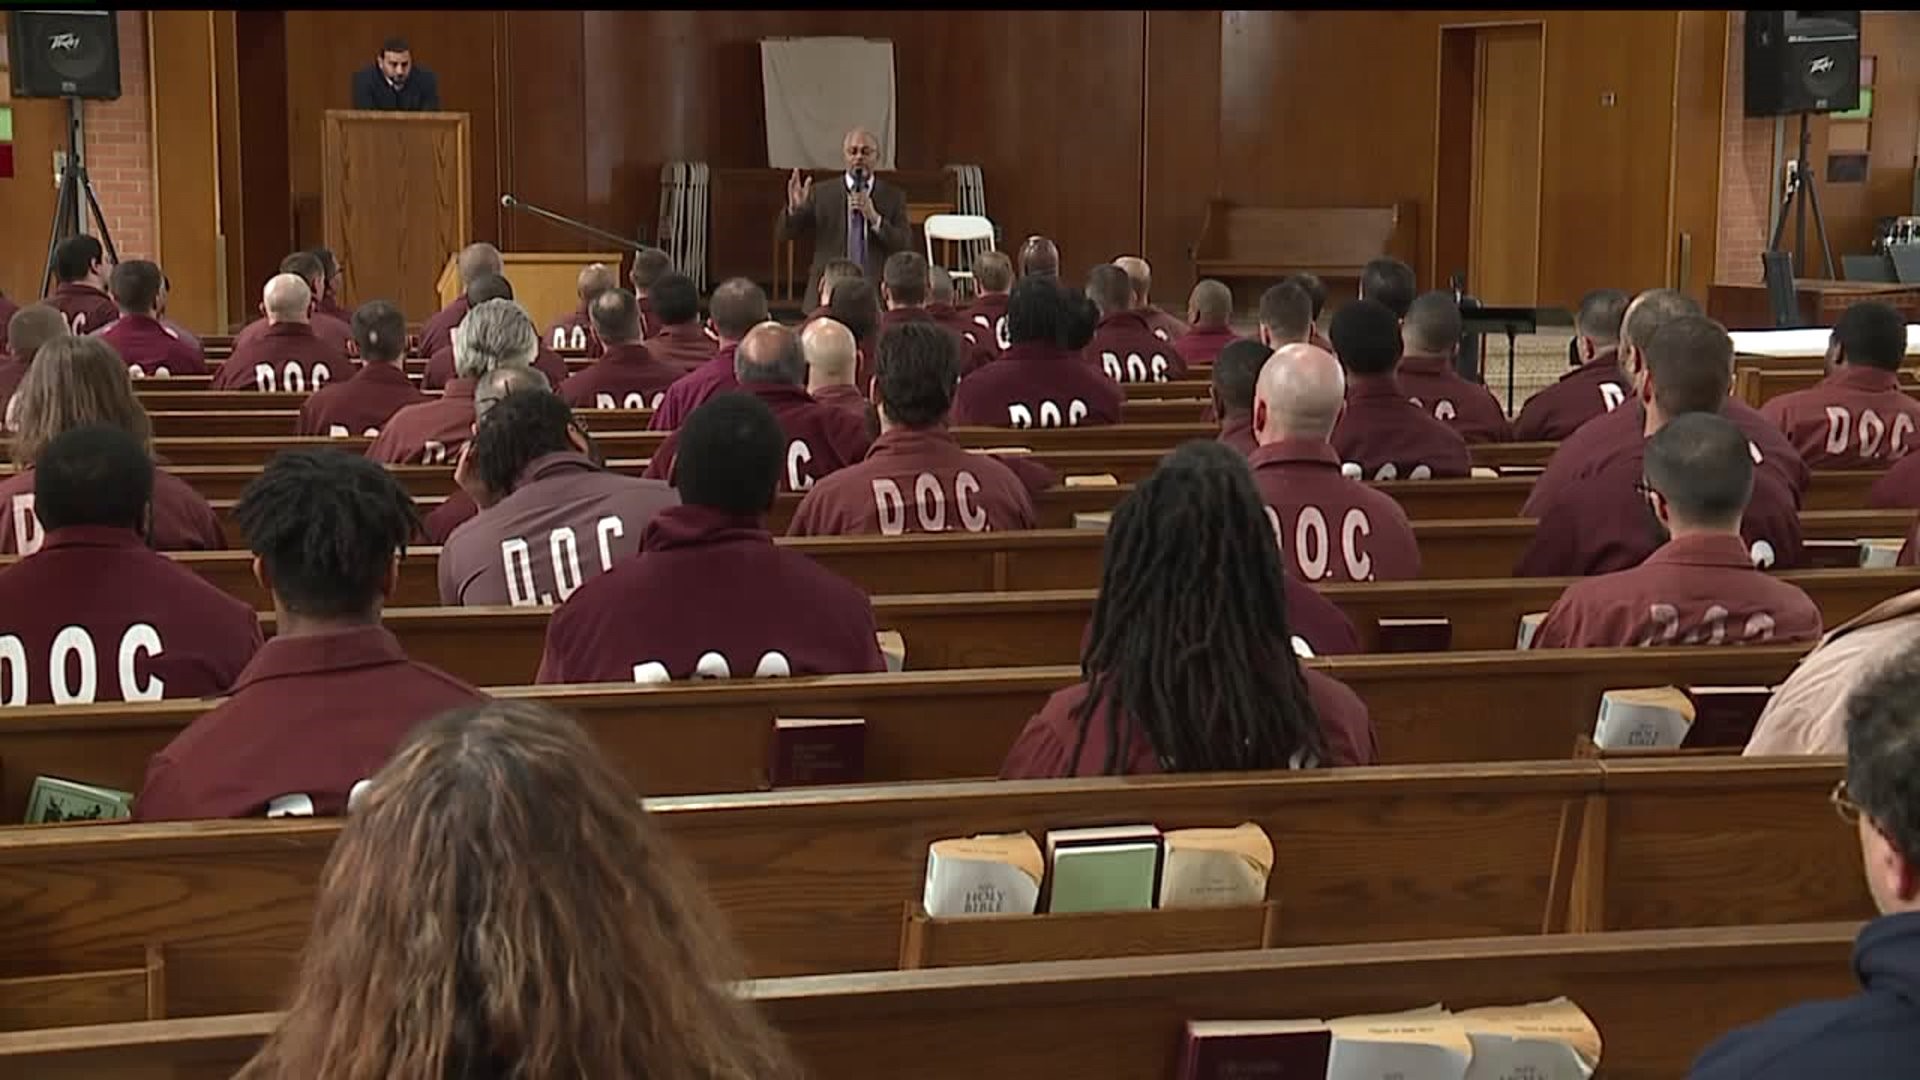 PA parole board members meet with inmates to discuss their re-integration into society